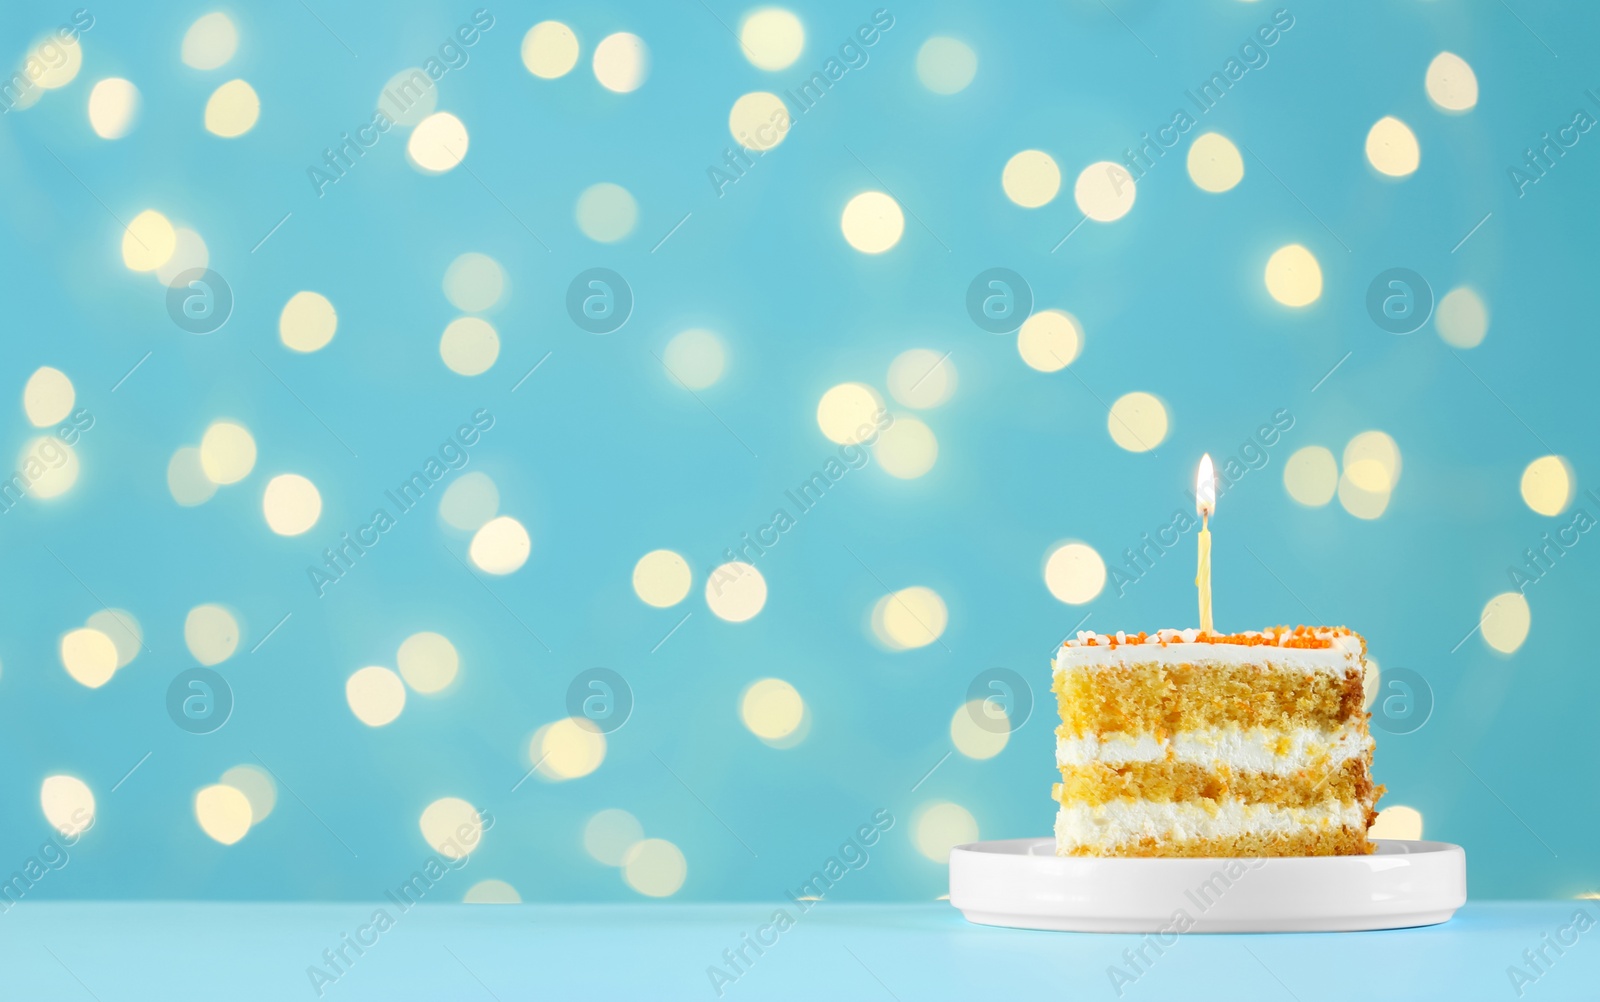 Photo of Piece of delicious birthday cake with burning candle against blurred lights on turquoise background. Space for text